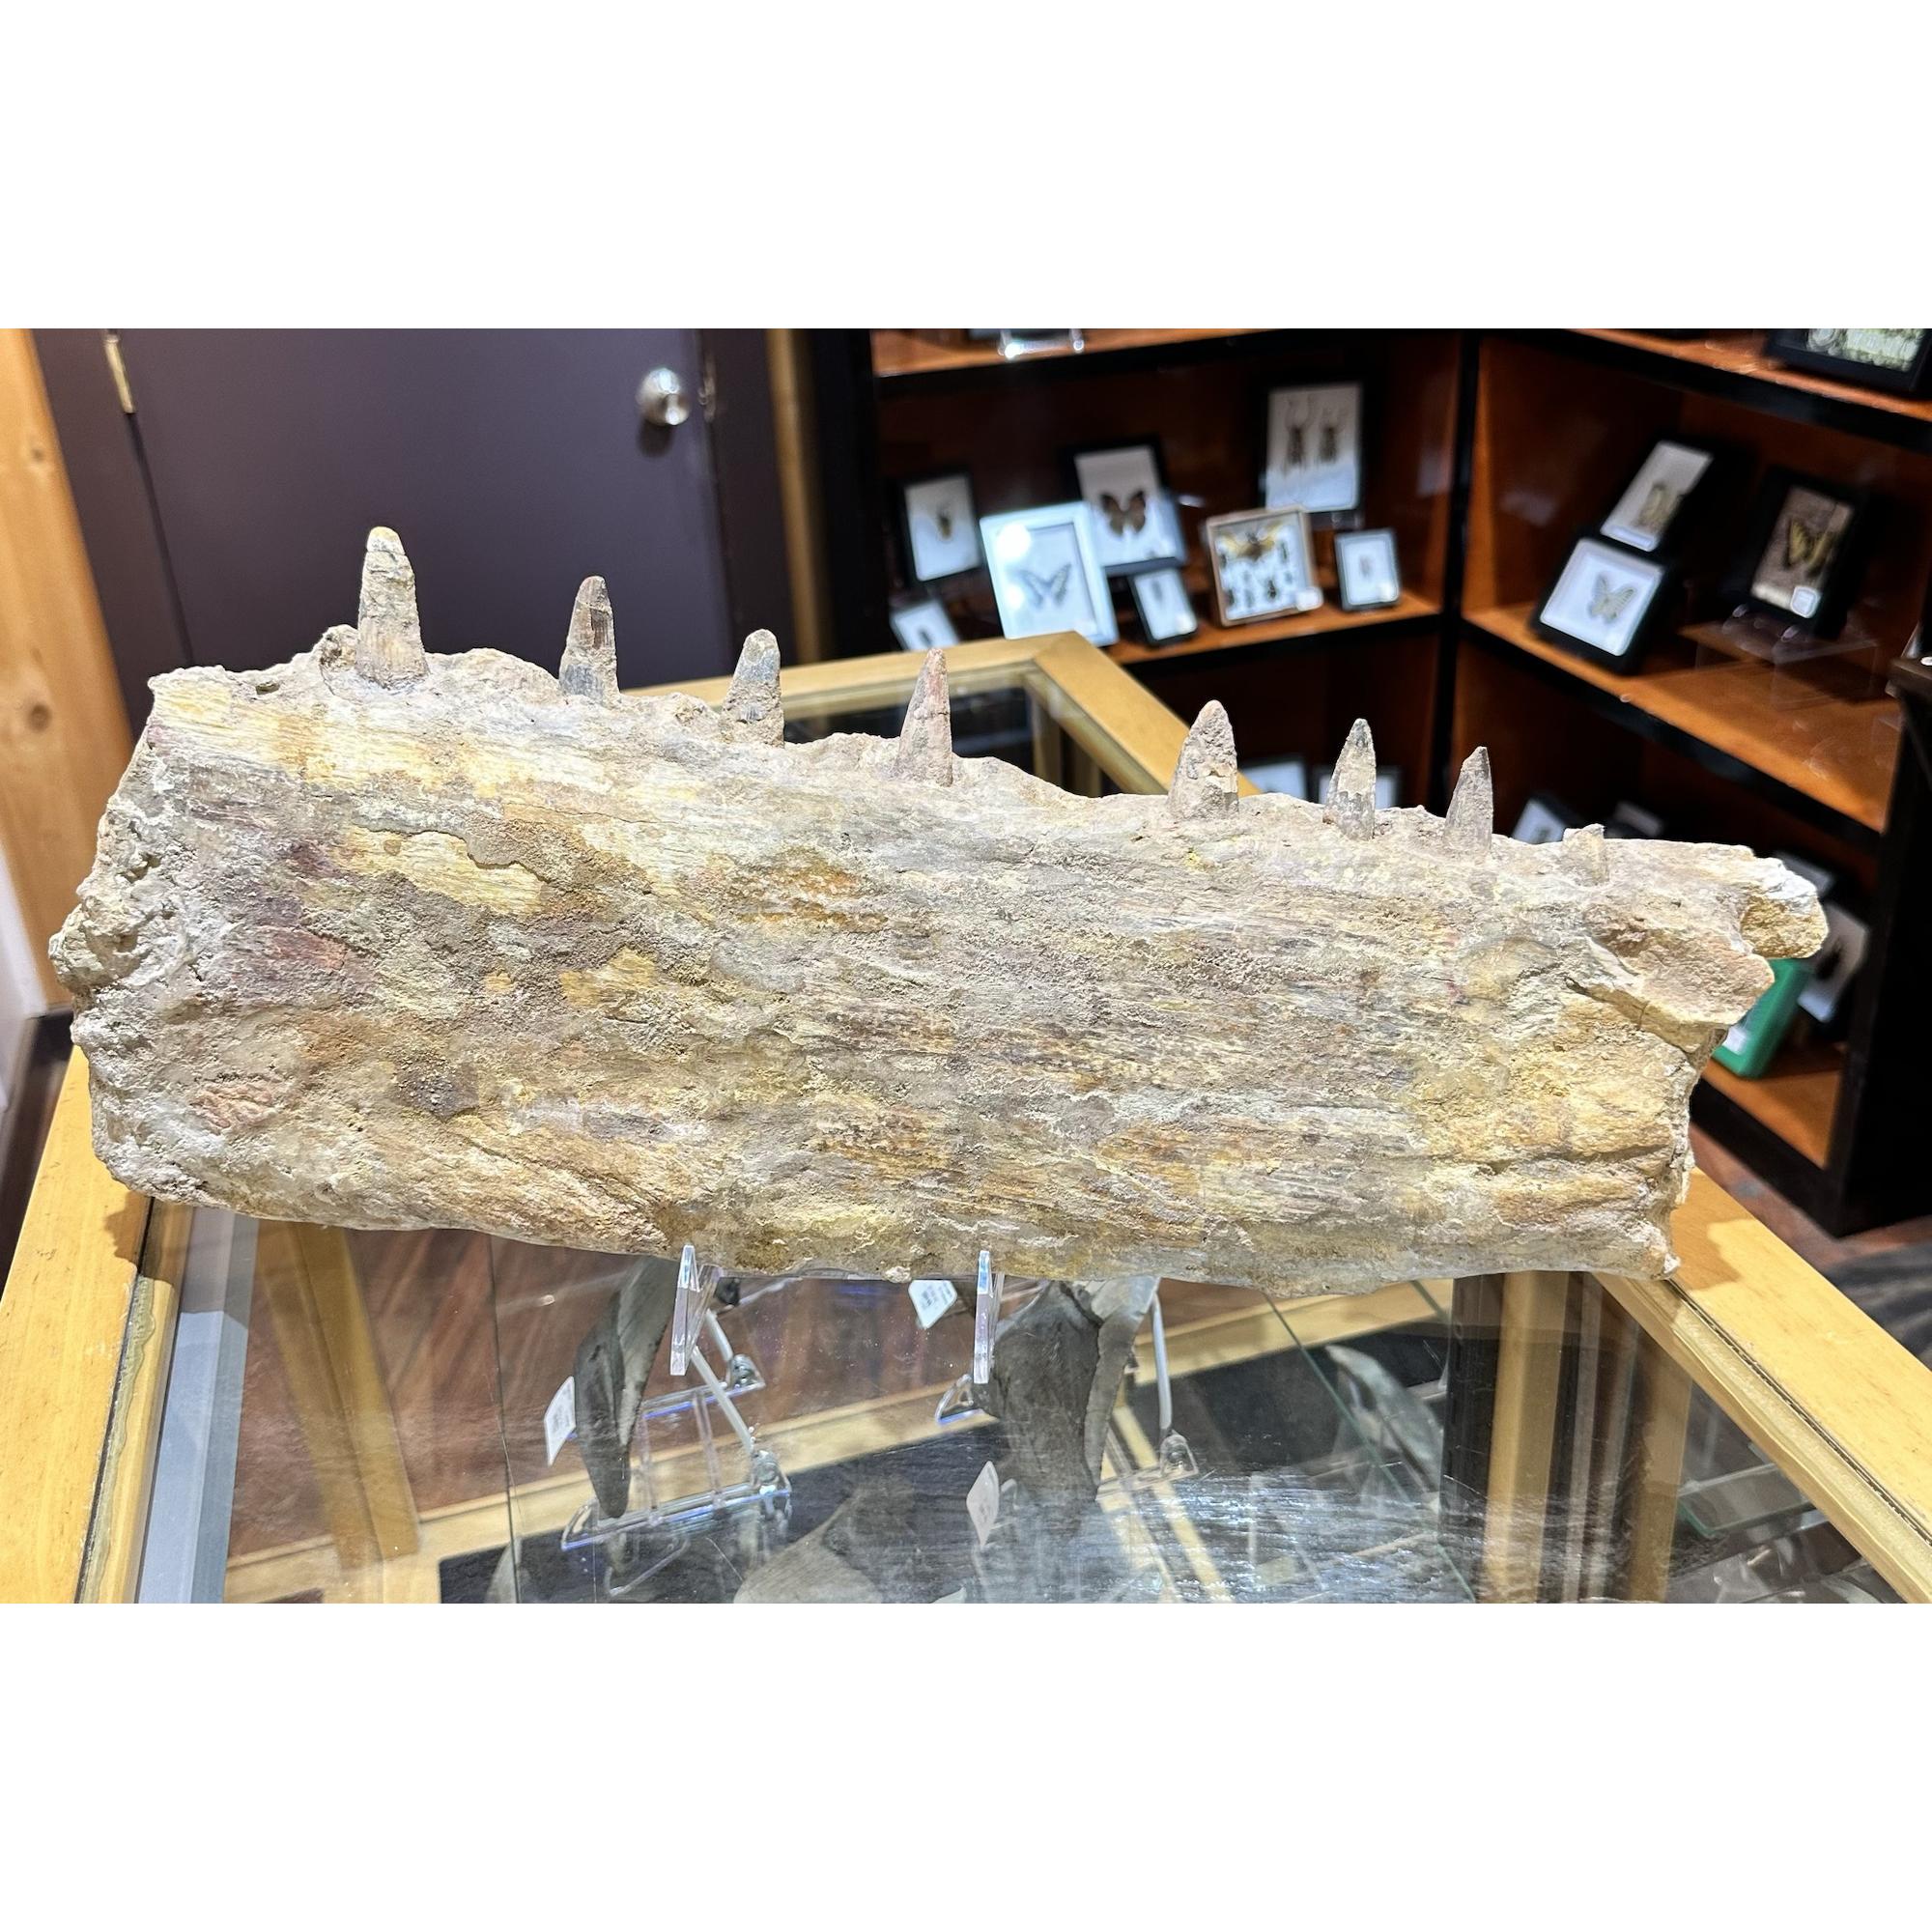 Spinosaurus Jaw section, Composite teeth Prehistoric Online